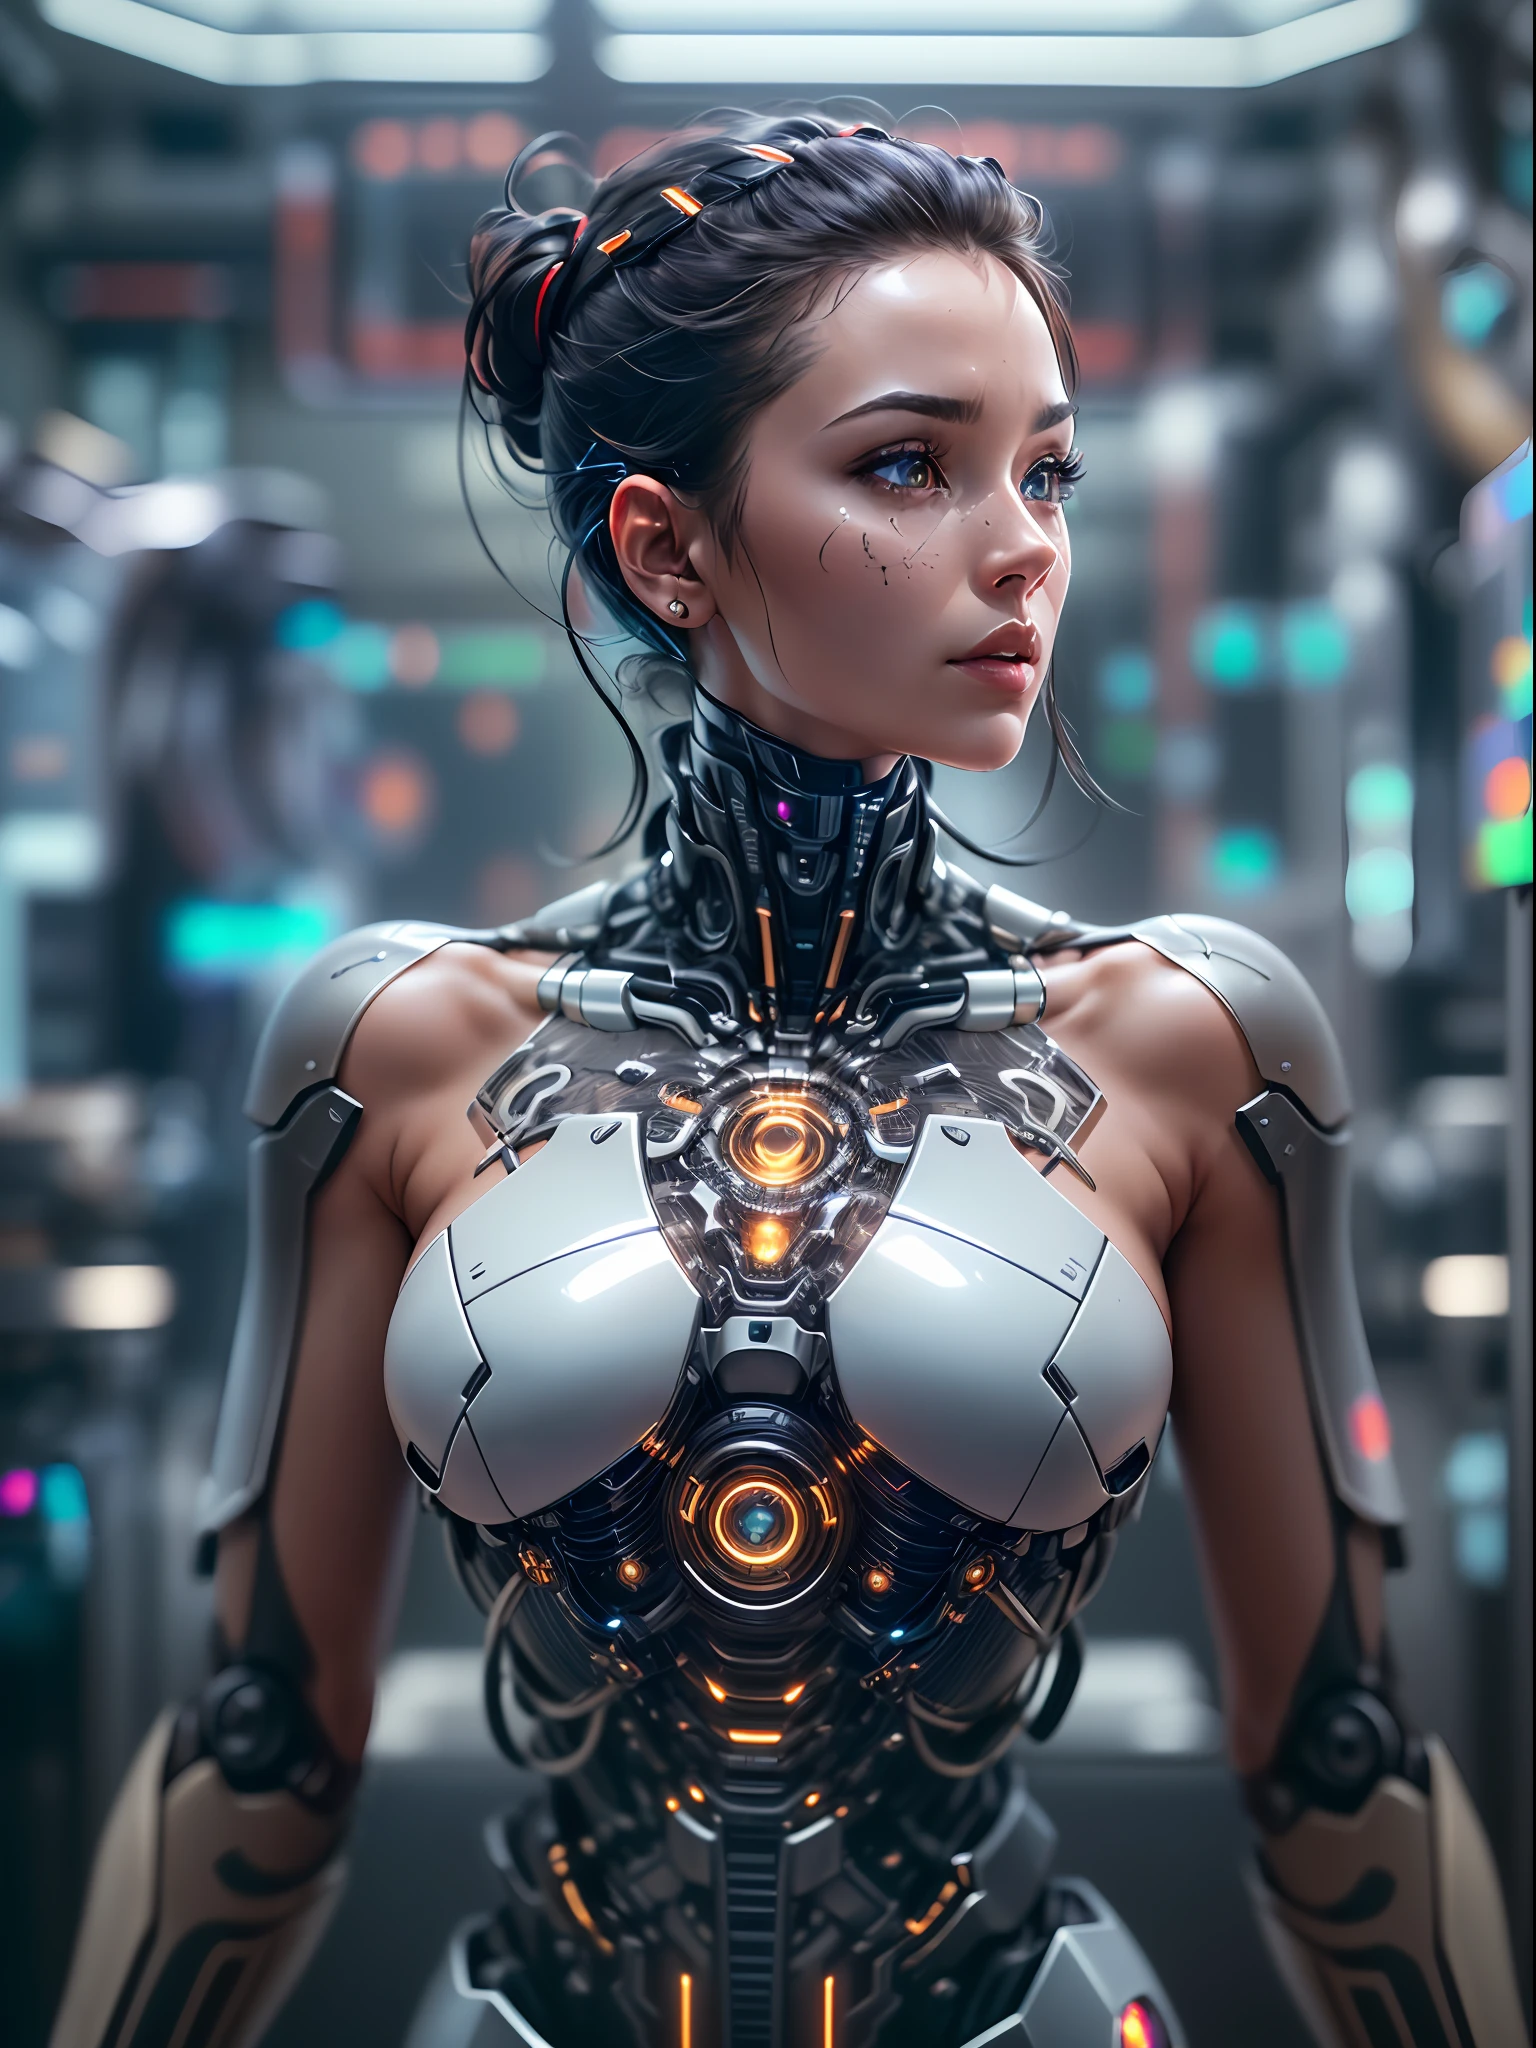 (masterpiece, high resolution, CGI:1.4), (depicting a woman with seamless robotic enhancements throughout her entire body:1.3), (her skin blending seamlessly with metallic components:1.2), (glowing circuitry running beneath her translucent skin:1.2), (mechanical joints and pistons providing enhanced mobility:1.2), (her eyes radiating with a subtle robotic glow:1.2), (intricate cybernetic tattoos adorning her body:1.2), (a metallic exoskeleton enhancing her strength and agility:1.2), (Canon EOS R5 mirrorless camera:1.2), (paired with a Canon RF 85mm f/1.2L USM lens:1.2), (capturing every detail of her advanced cybernetics:1.2), (the laboratory environment designed with a futuristic and minimalist aesthetic:1.2), (sleek and clean lines defining the space:1.1), (holographic displays showcasing advanced technology:1.1), (subtle ambient lighting adding a touch of sci-fi allure:1.1), (a captivating CGI render of a woman embodying the future of human-machine integration:1.2), Cinematic, Hyper-detailed, insane details, Beautifully color graded, Unreal Engine, DOF, Super-Resolution, Megapixel, Cinematic Lightning, Anti-Aliasing, FKAA, TXAA, RTX, SSAO, Post Processing, Post Production, Tone Mapping, CGI, VFX, SFX, Insanely detailed and intricate, Hyper maximalist, Hyper realistic, Volumetric, Photorealistic, ultra photoreal, ultra-detailed, intricate details, 8K, Super detailed, Full color, Volumetric lightning, HDR, Realistic, Unreal Engine, 16K, Sharp focus, Octane render